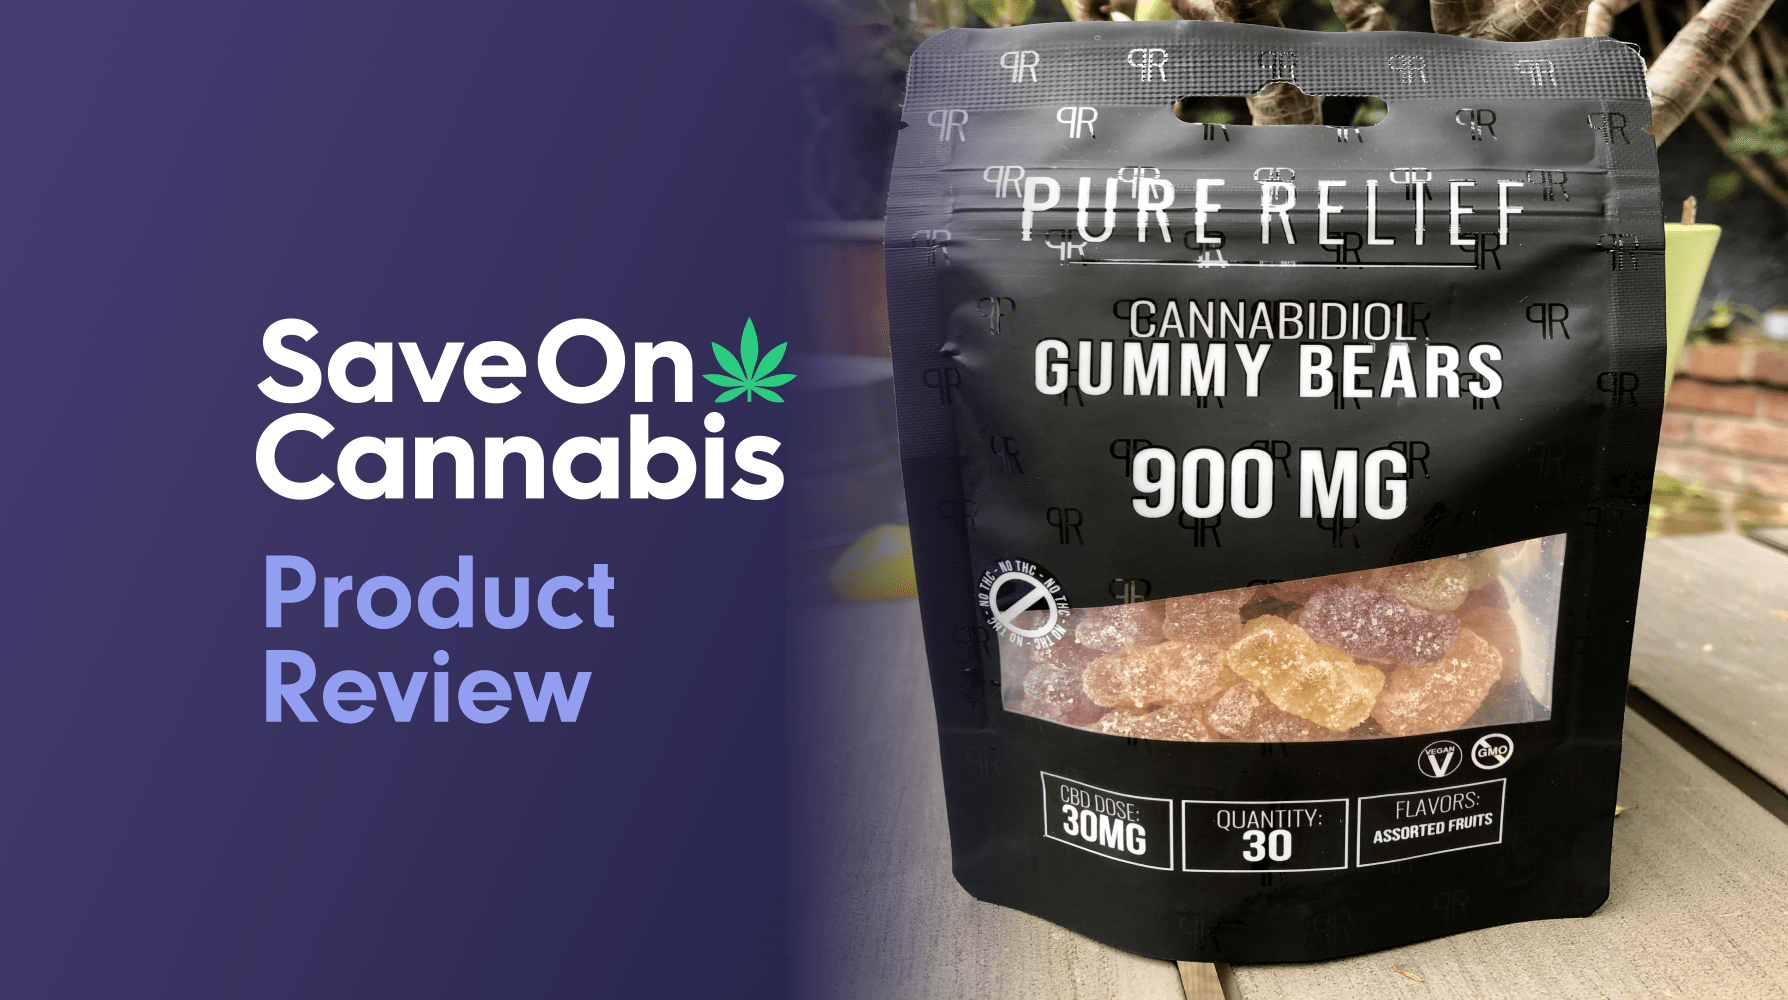 Pure Relief Daytime Hemp Gummies Save On Cannabis Review Website